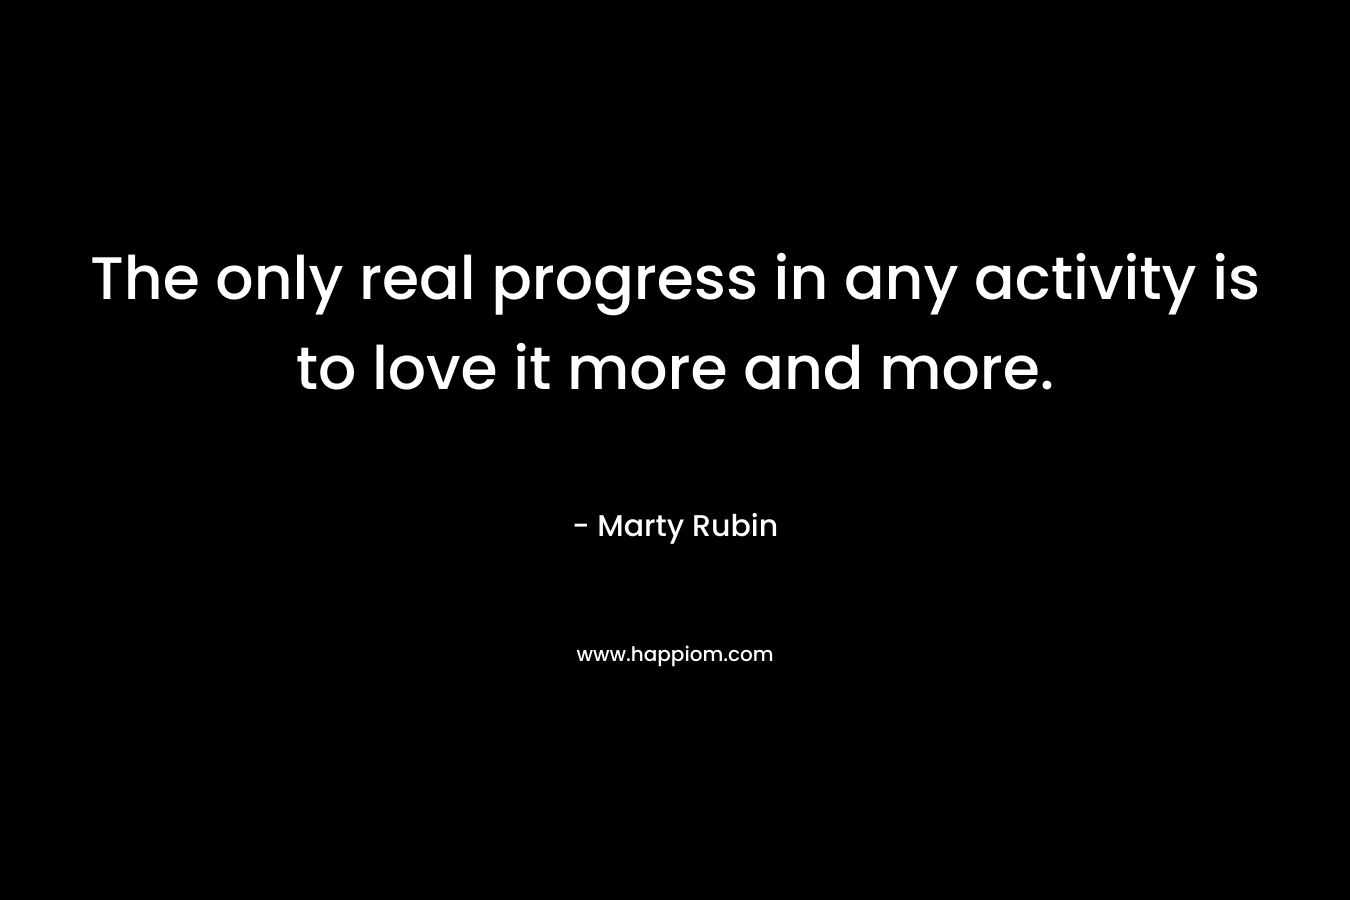 The only real progress in any activity is to love it more and more. – Marty Rubin